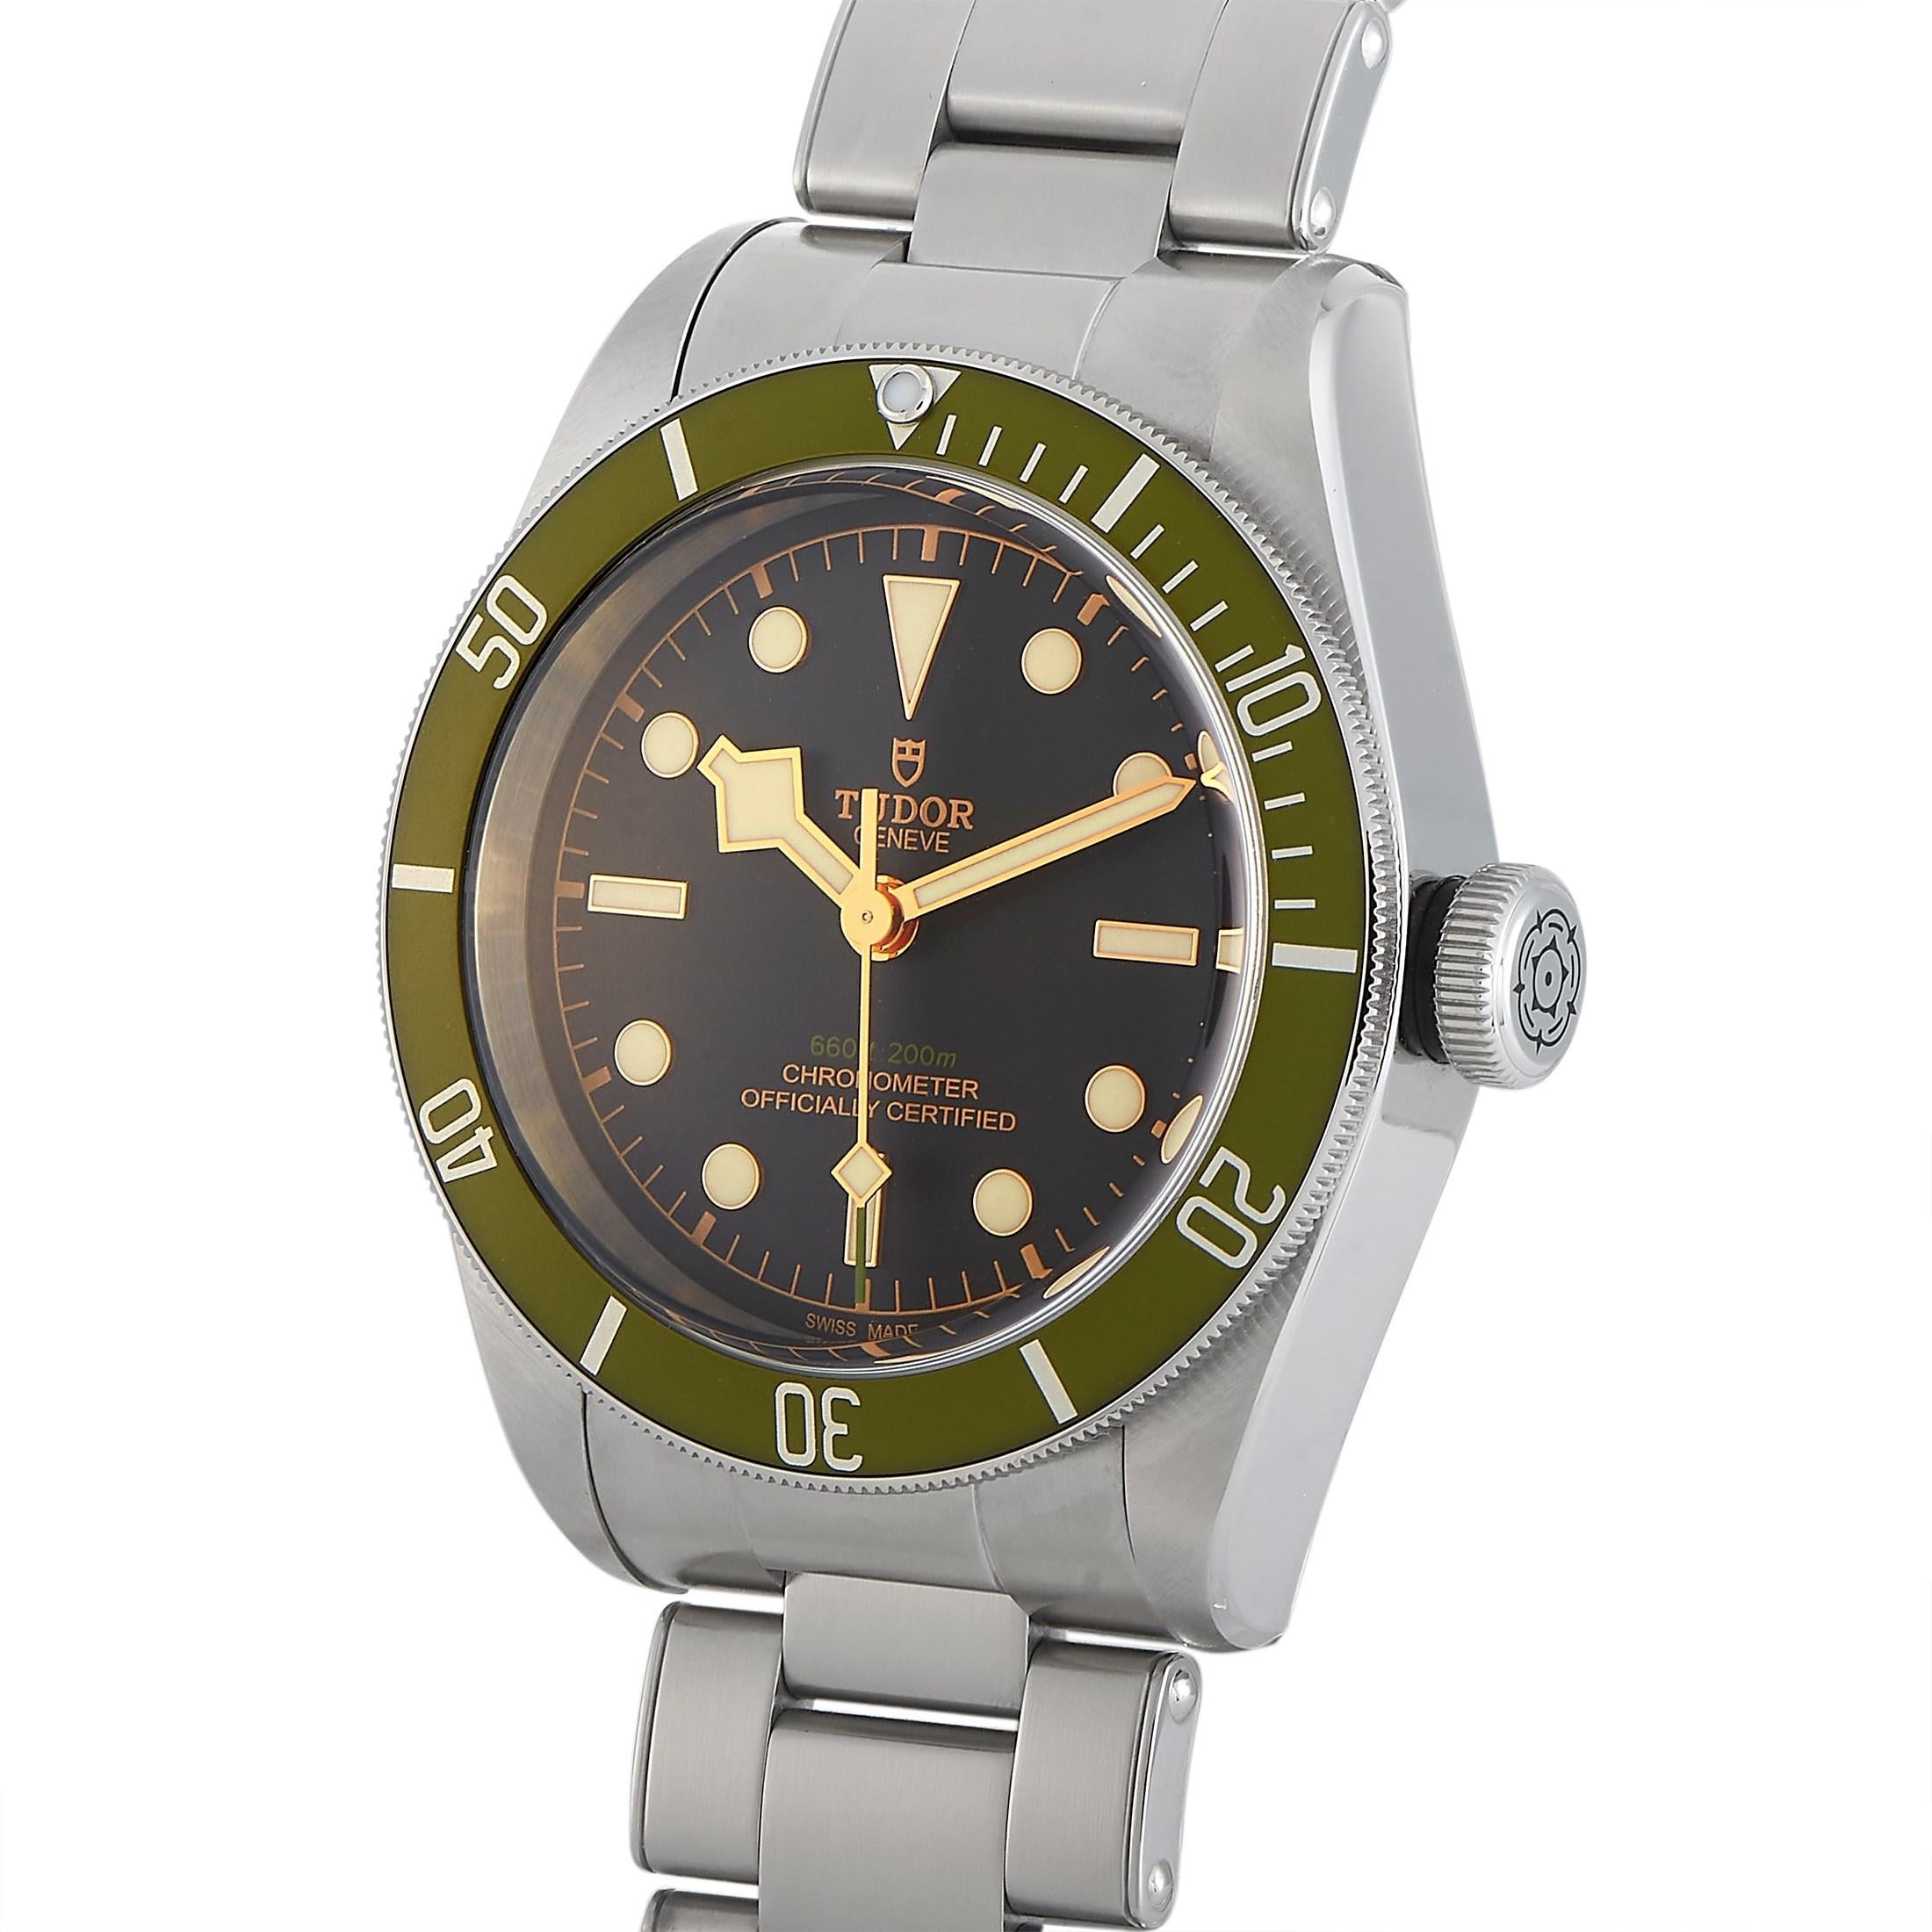 Obtainable only through Harrods Fine Watch Room in London, this Tudor Black Bay Harrods Edition Green Bezel Watch 792306 is offered in limited production. Here is one chance for you to own one. This timepiece features a unique olive green bezel that